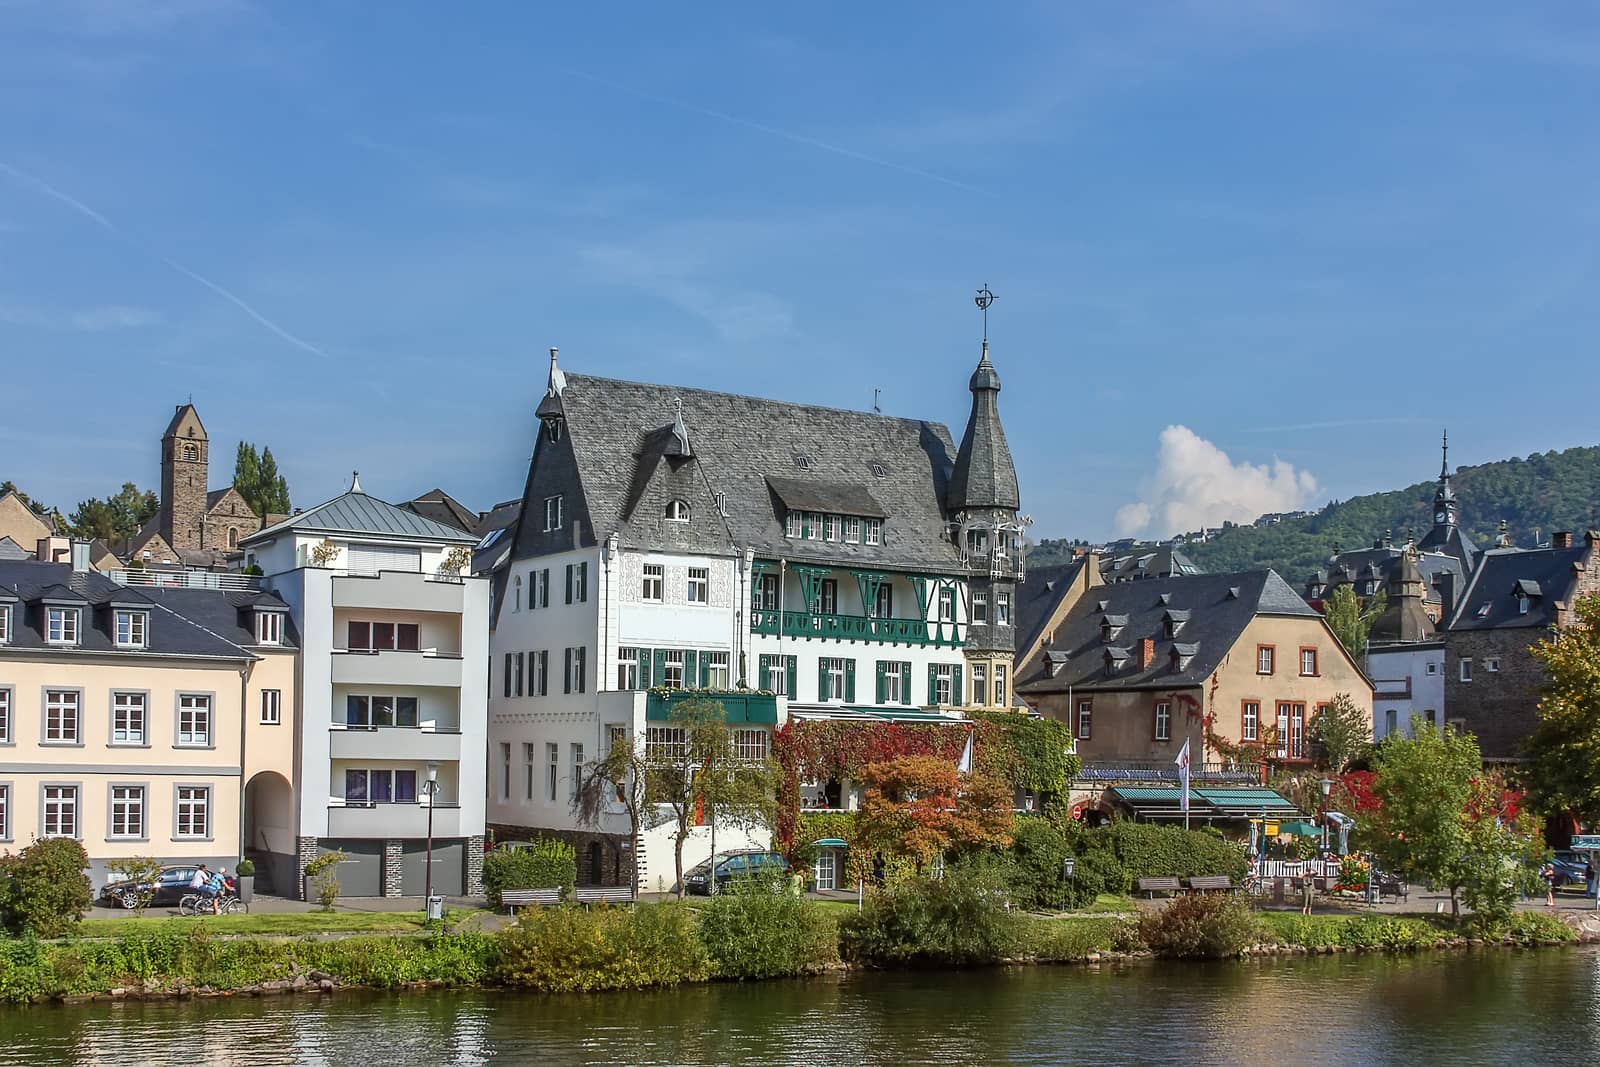 city on the banks of river, Germany by borisb17